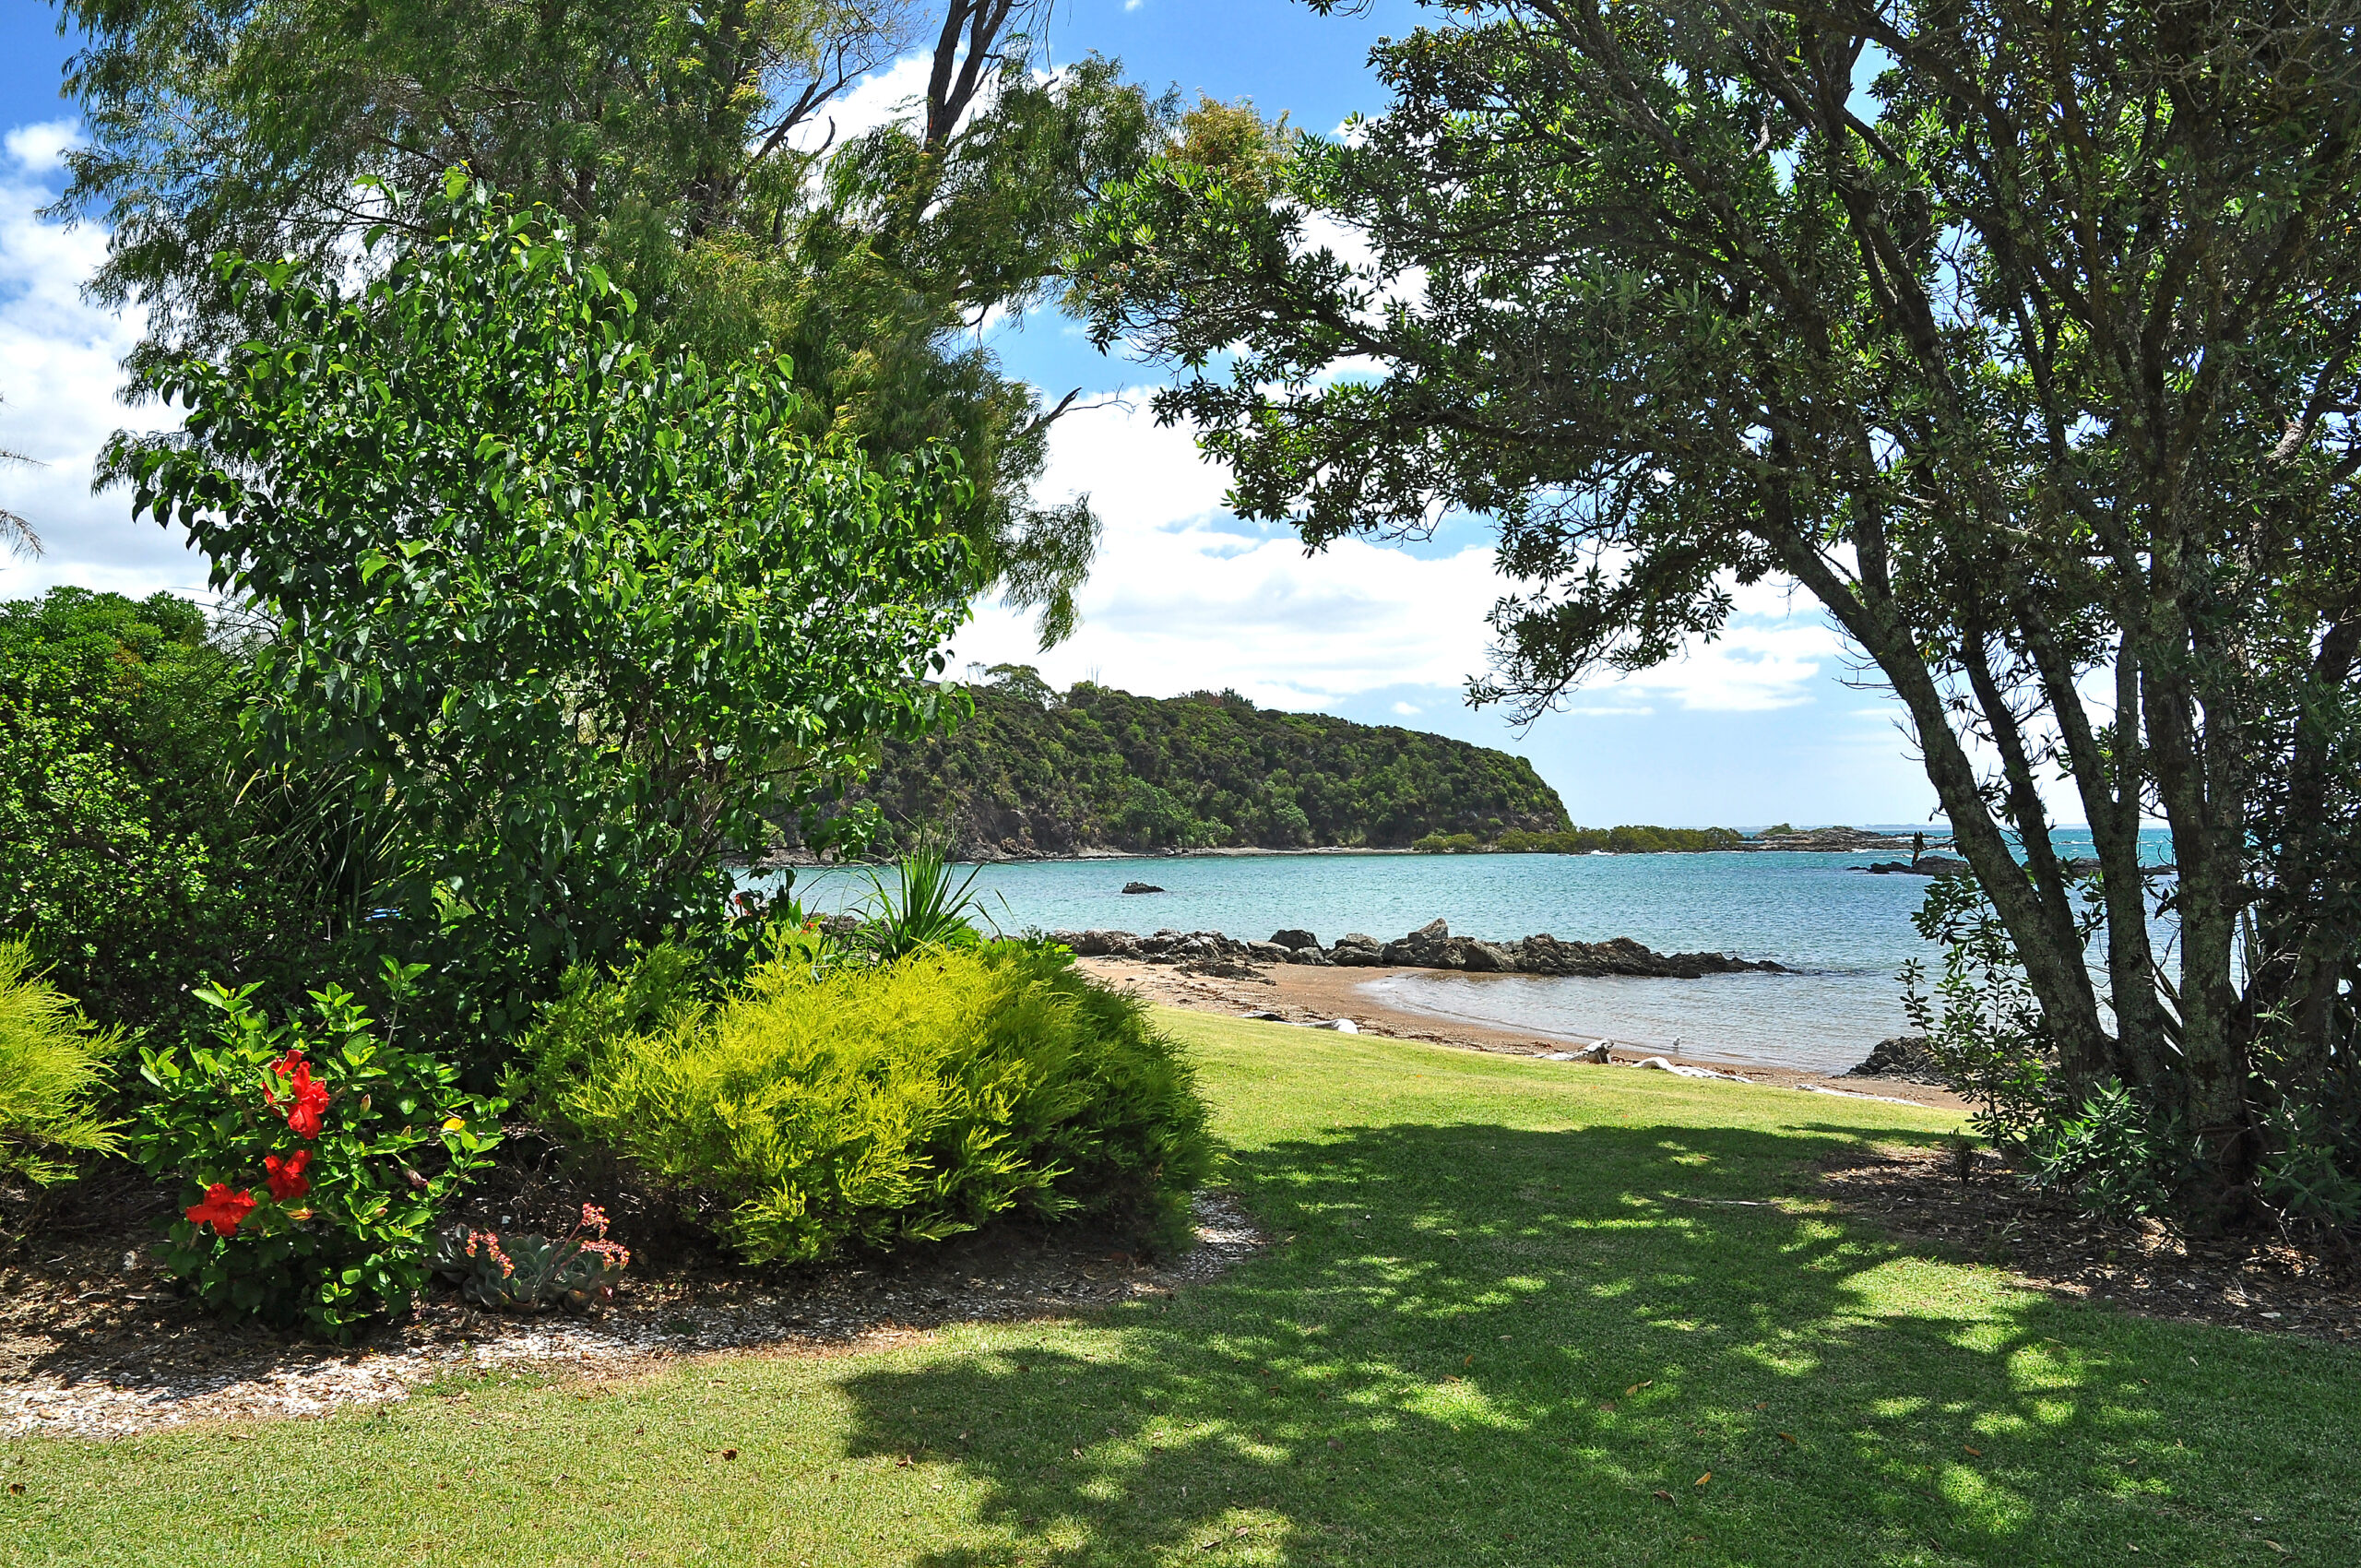 Landscaped gardens down to the waters edge and private waterfront coopers beach area